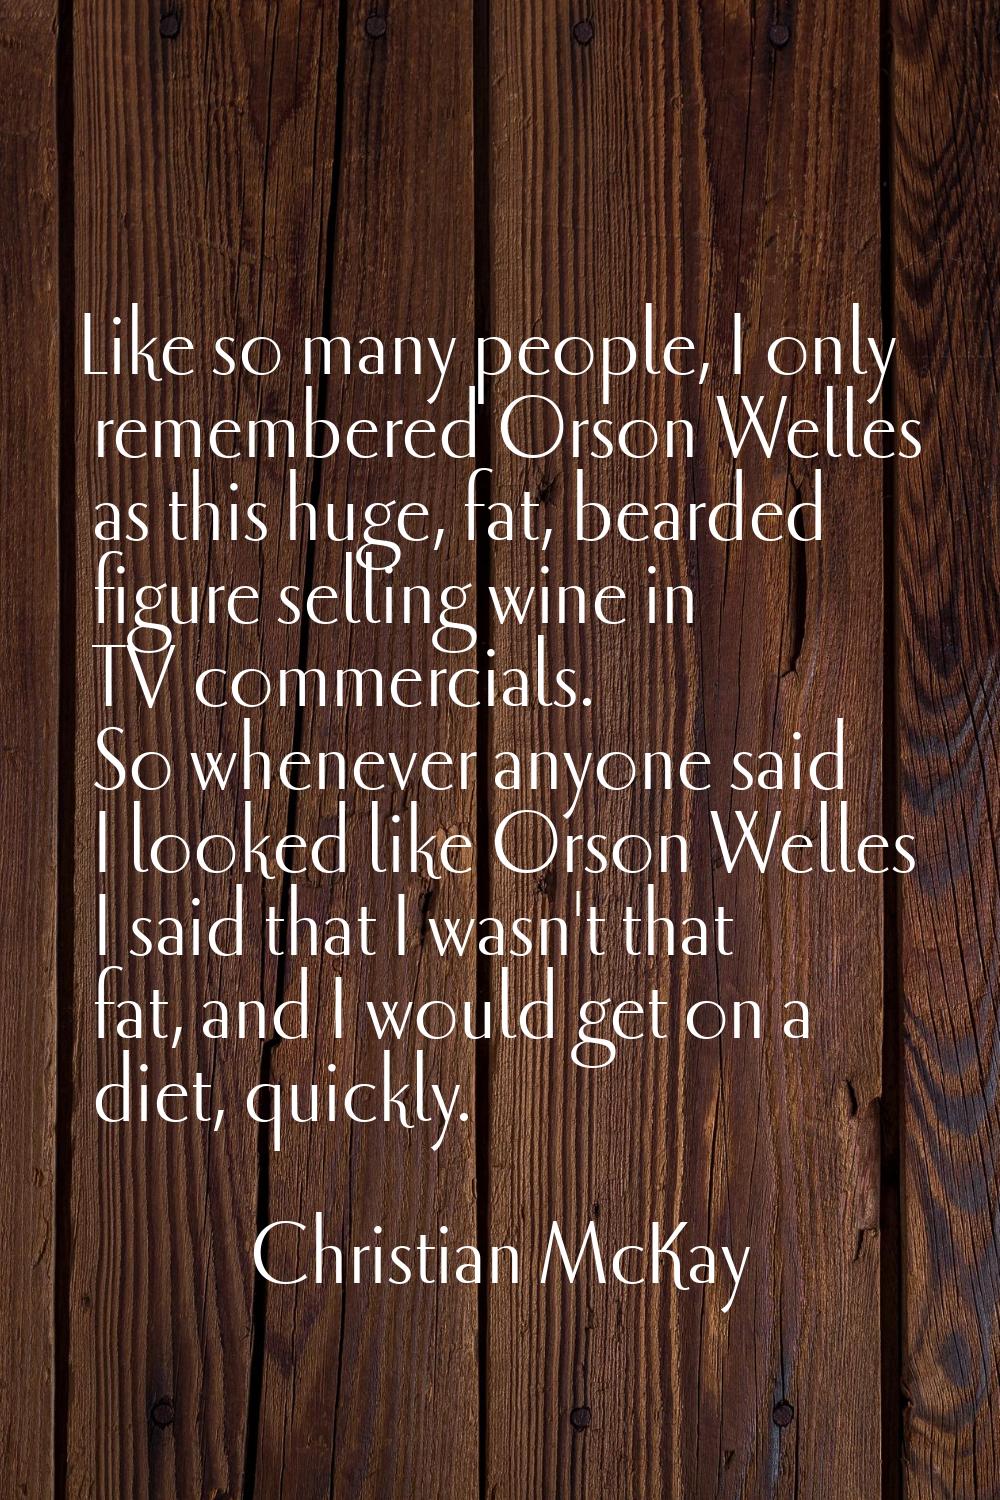 Like so many people, I only remembered Orson Welles as this huge, fat, bearded figure selling wine 